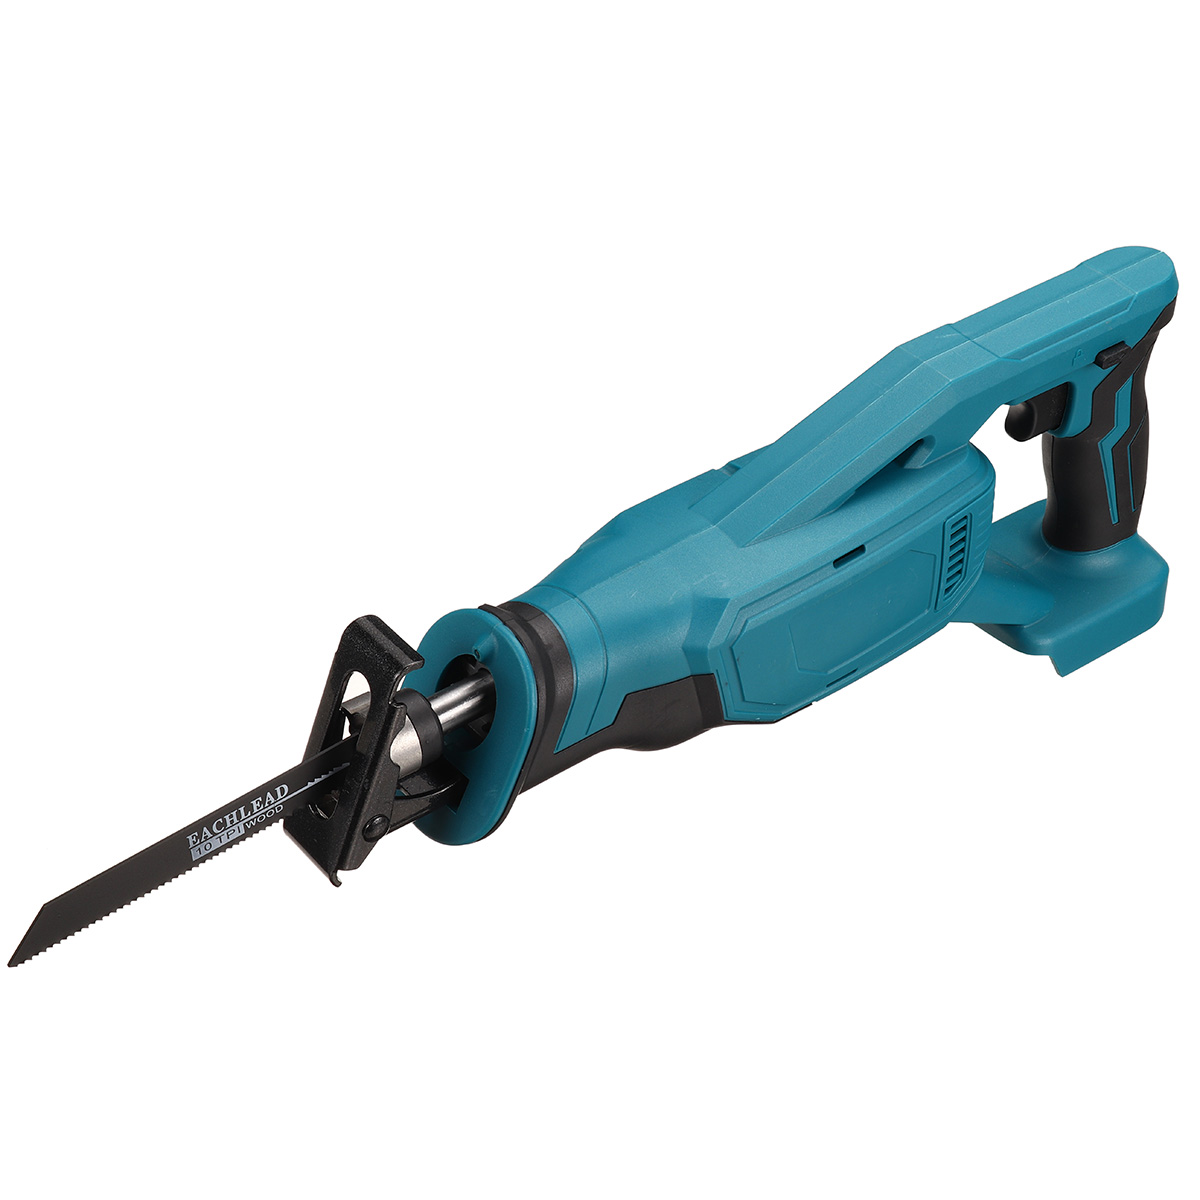 18V-Blue-Electric-Reciprocating-Saw-Variable-Speed-Cordless-Wood-Metal-Cutting-Power-Tools-Set-1716396-3